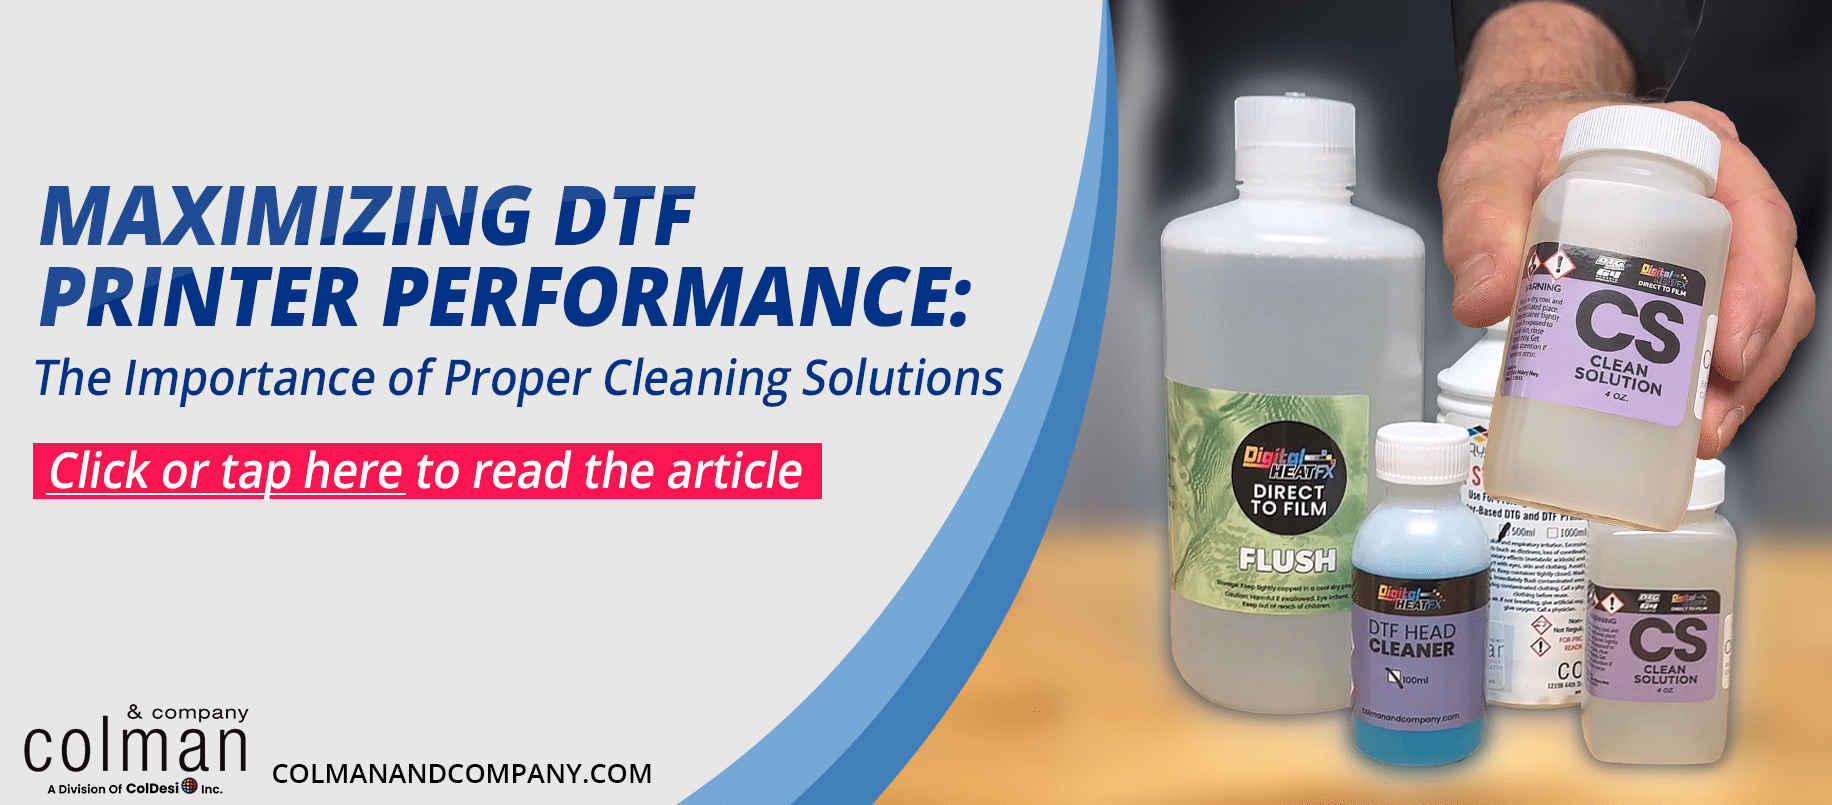 Maximizing DTF Printer Performance: The Importance of Proper Cleaning Solutions